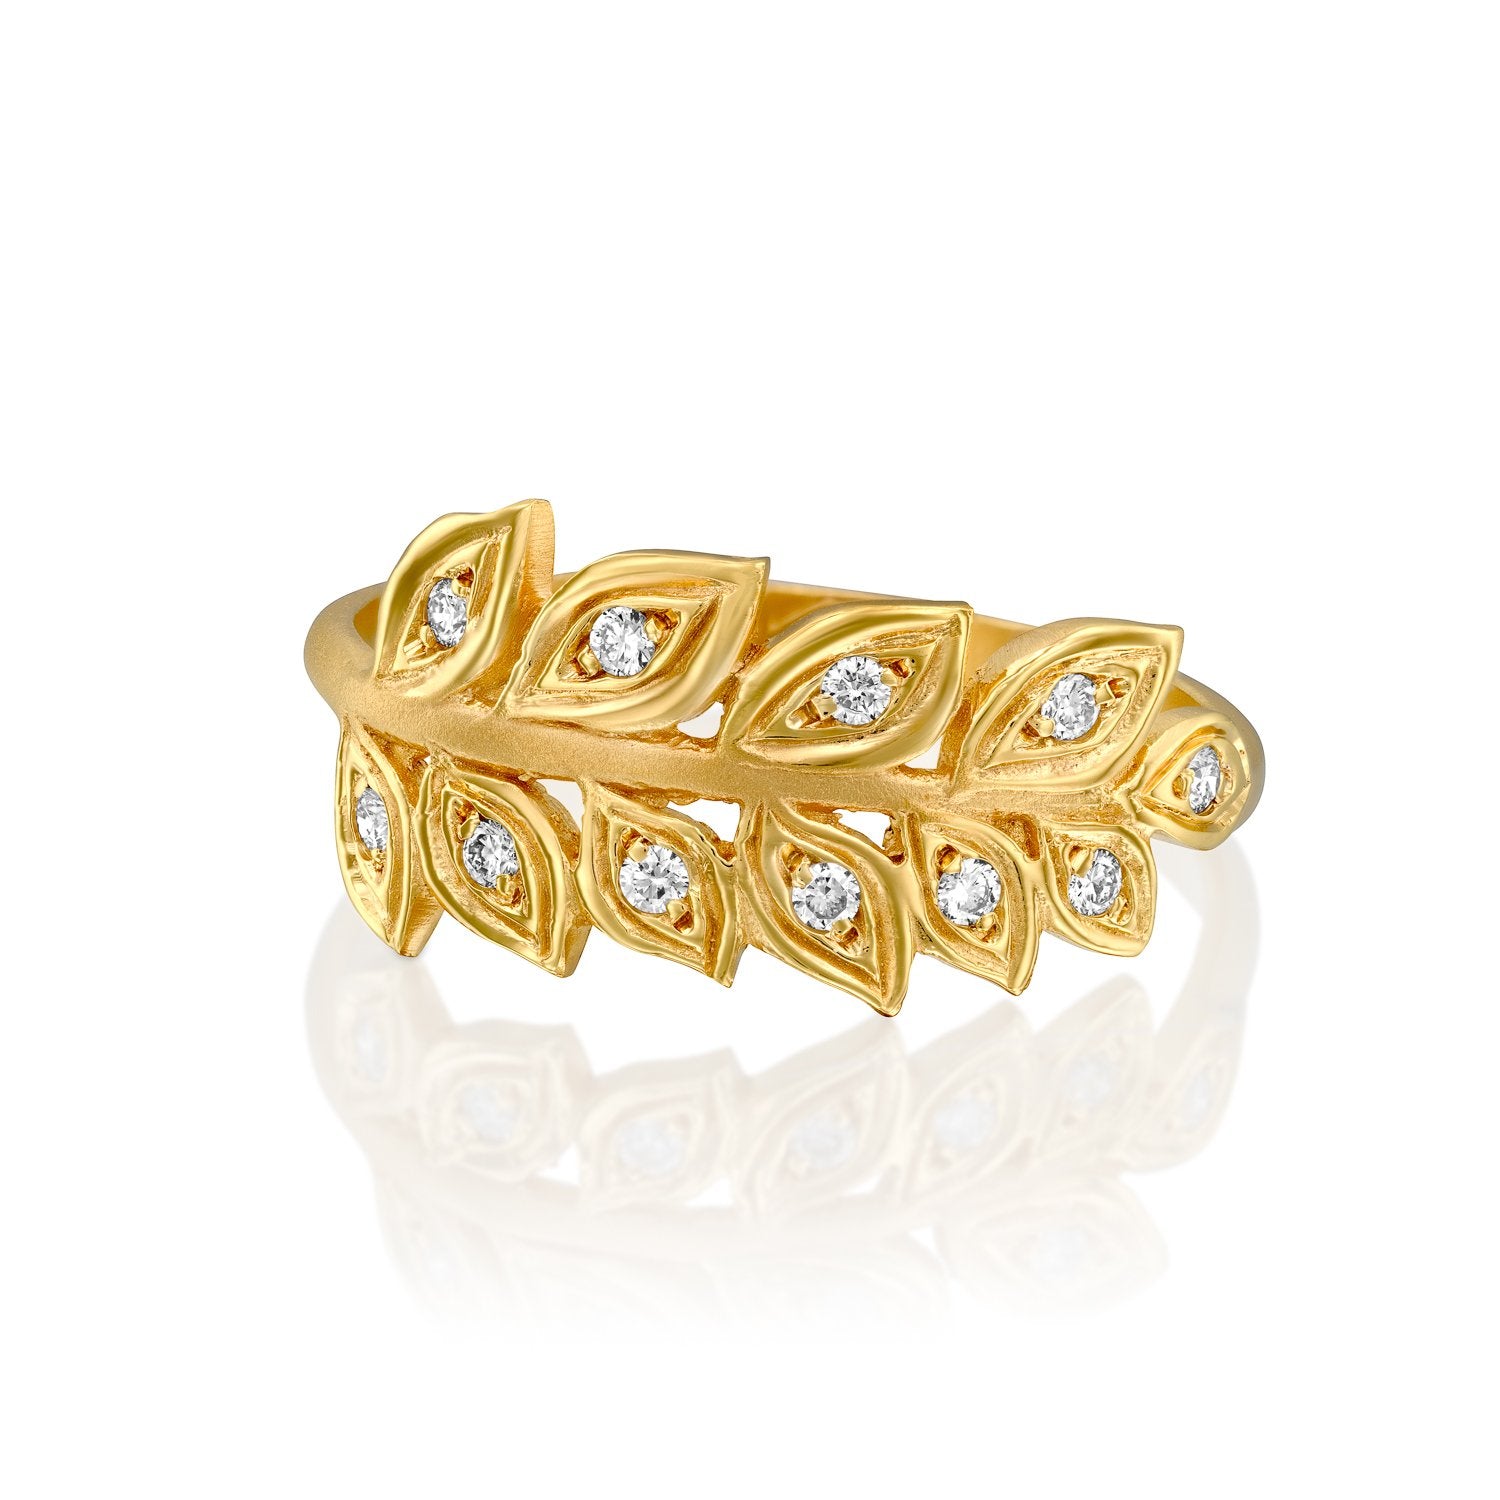 7026 - 14kt yellow gold wheat leaf ring with 0.11cttw white diamonds